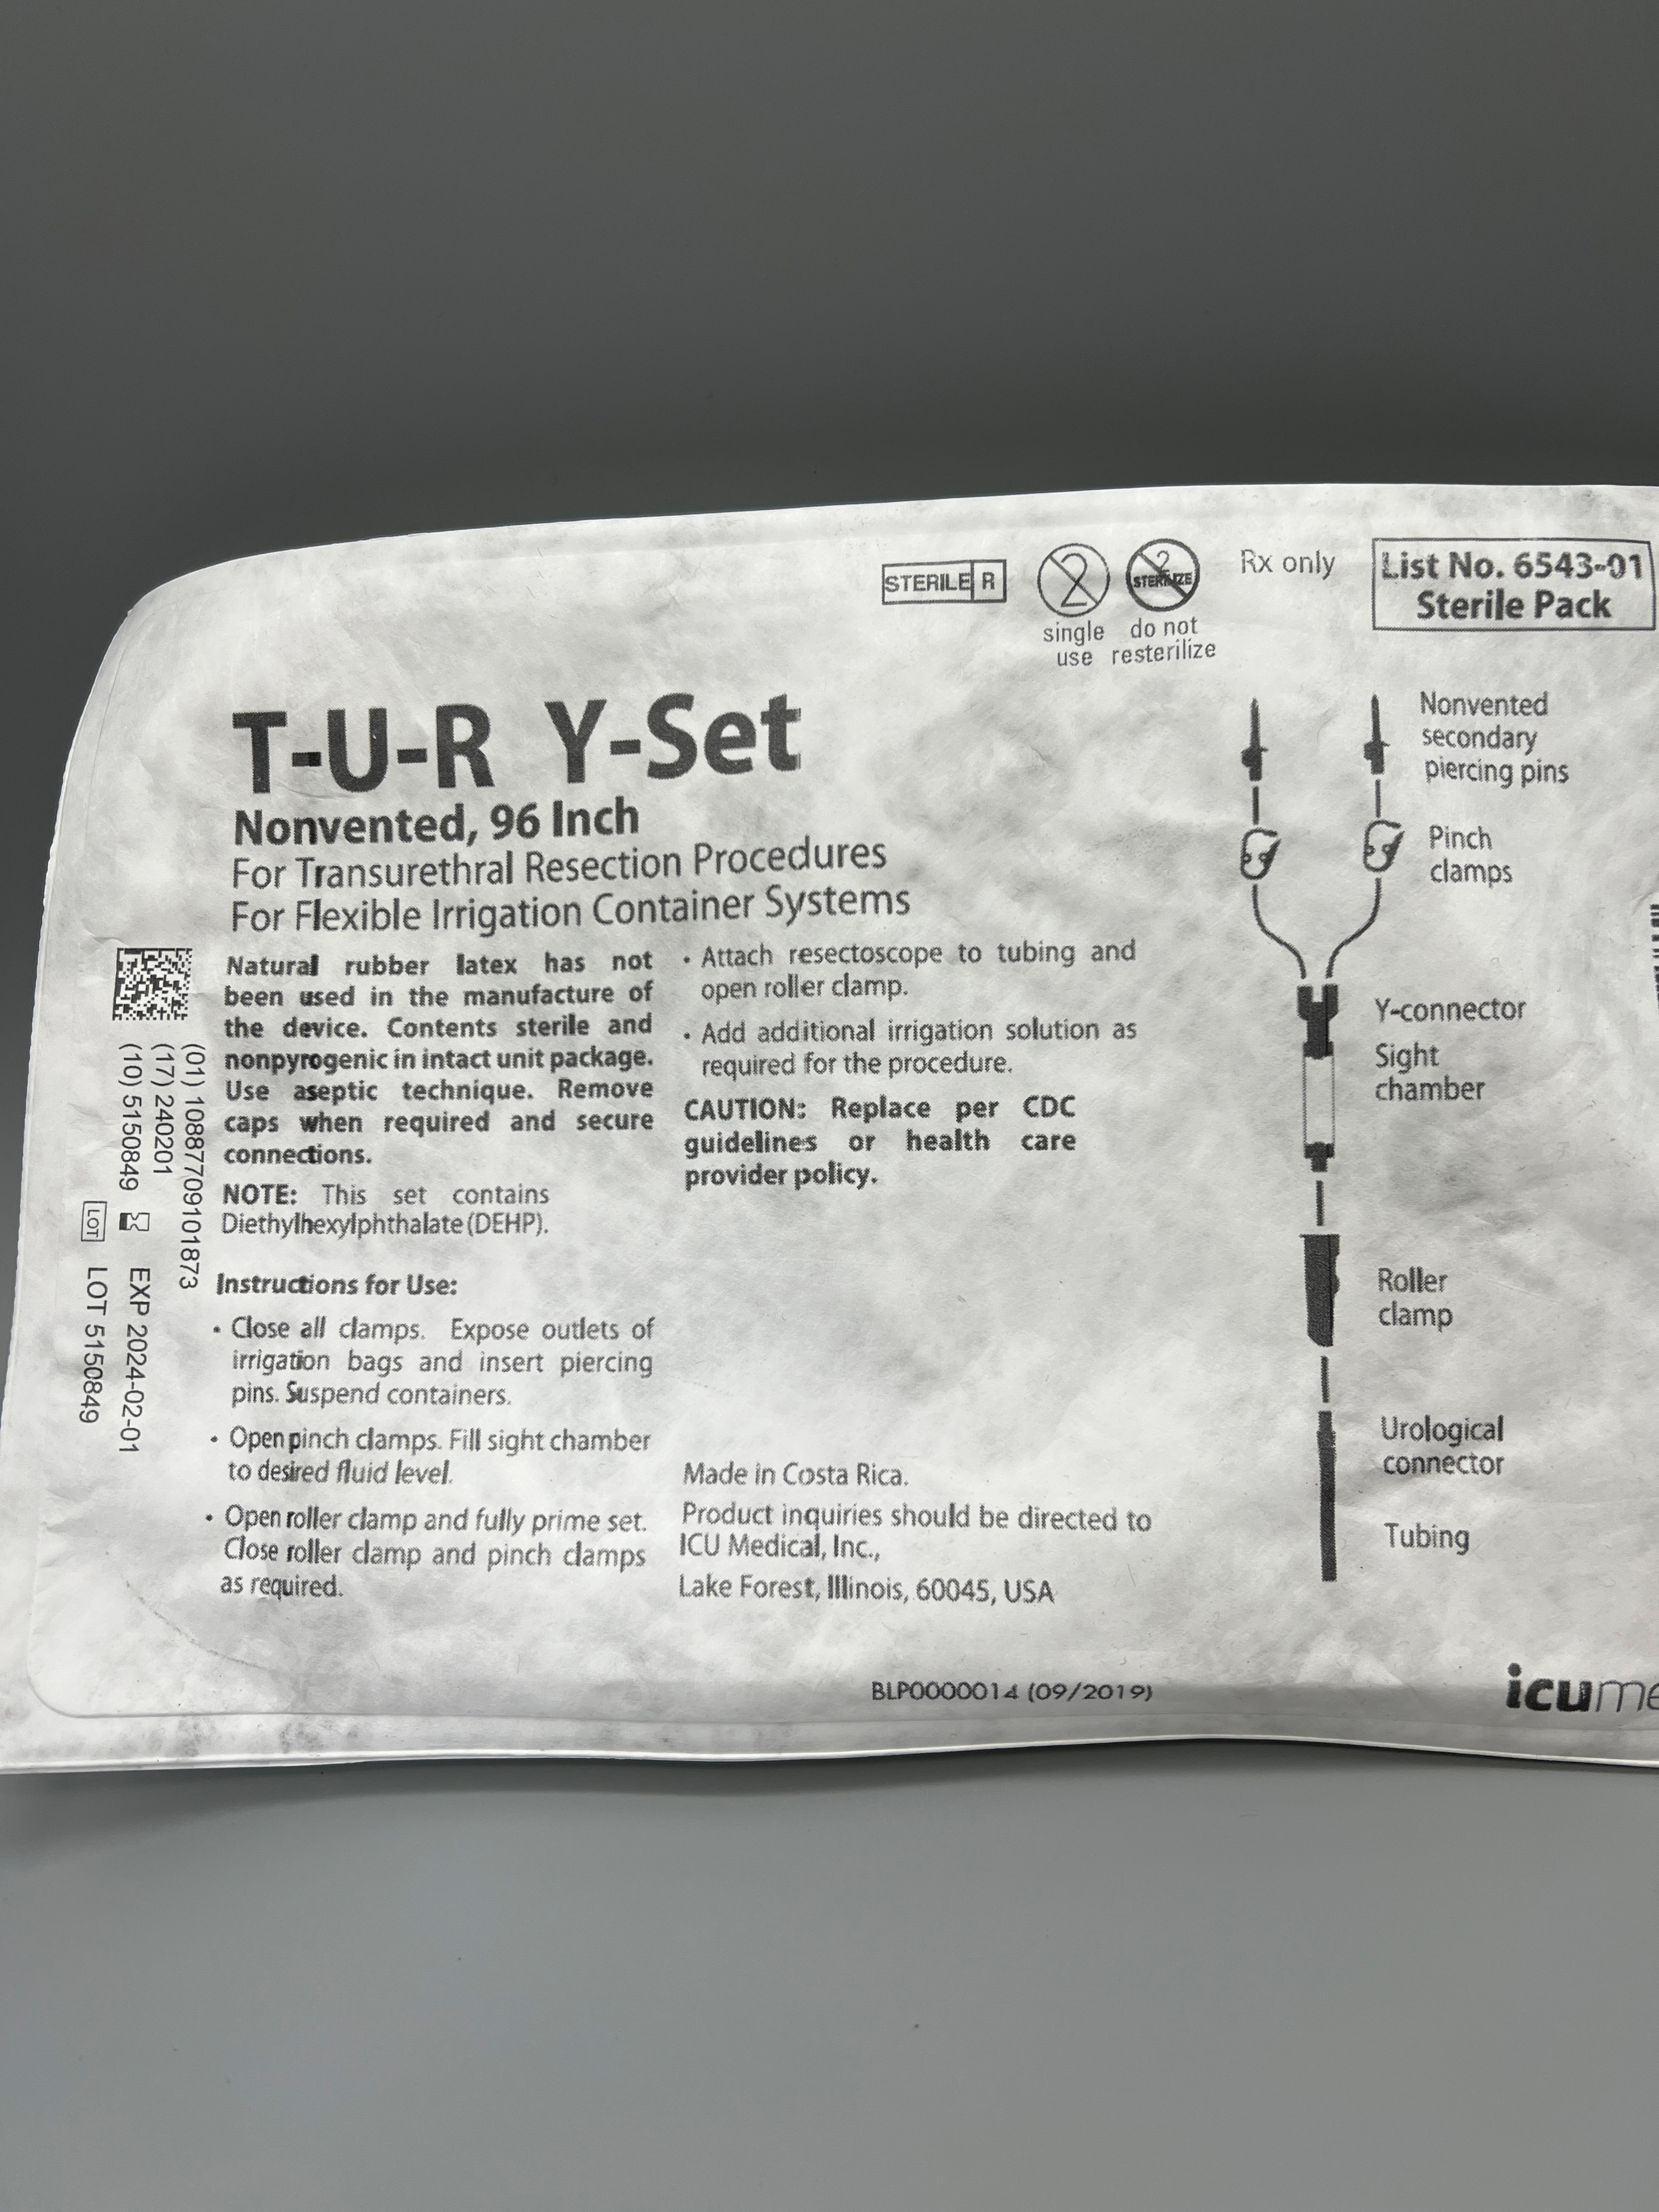 T-U-R Y-SET NONVENTED FOR TRANSURETHRAL PROCEDURES, FOR FLEXIBLE IRRSGATION CONTAINER SYSTEMS